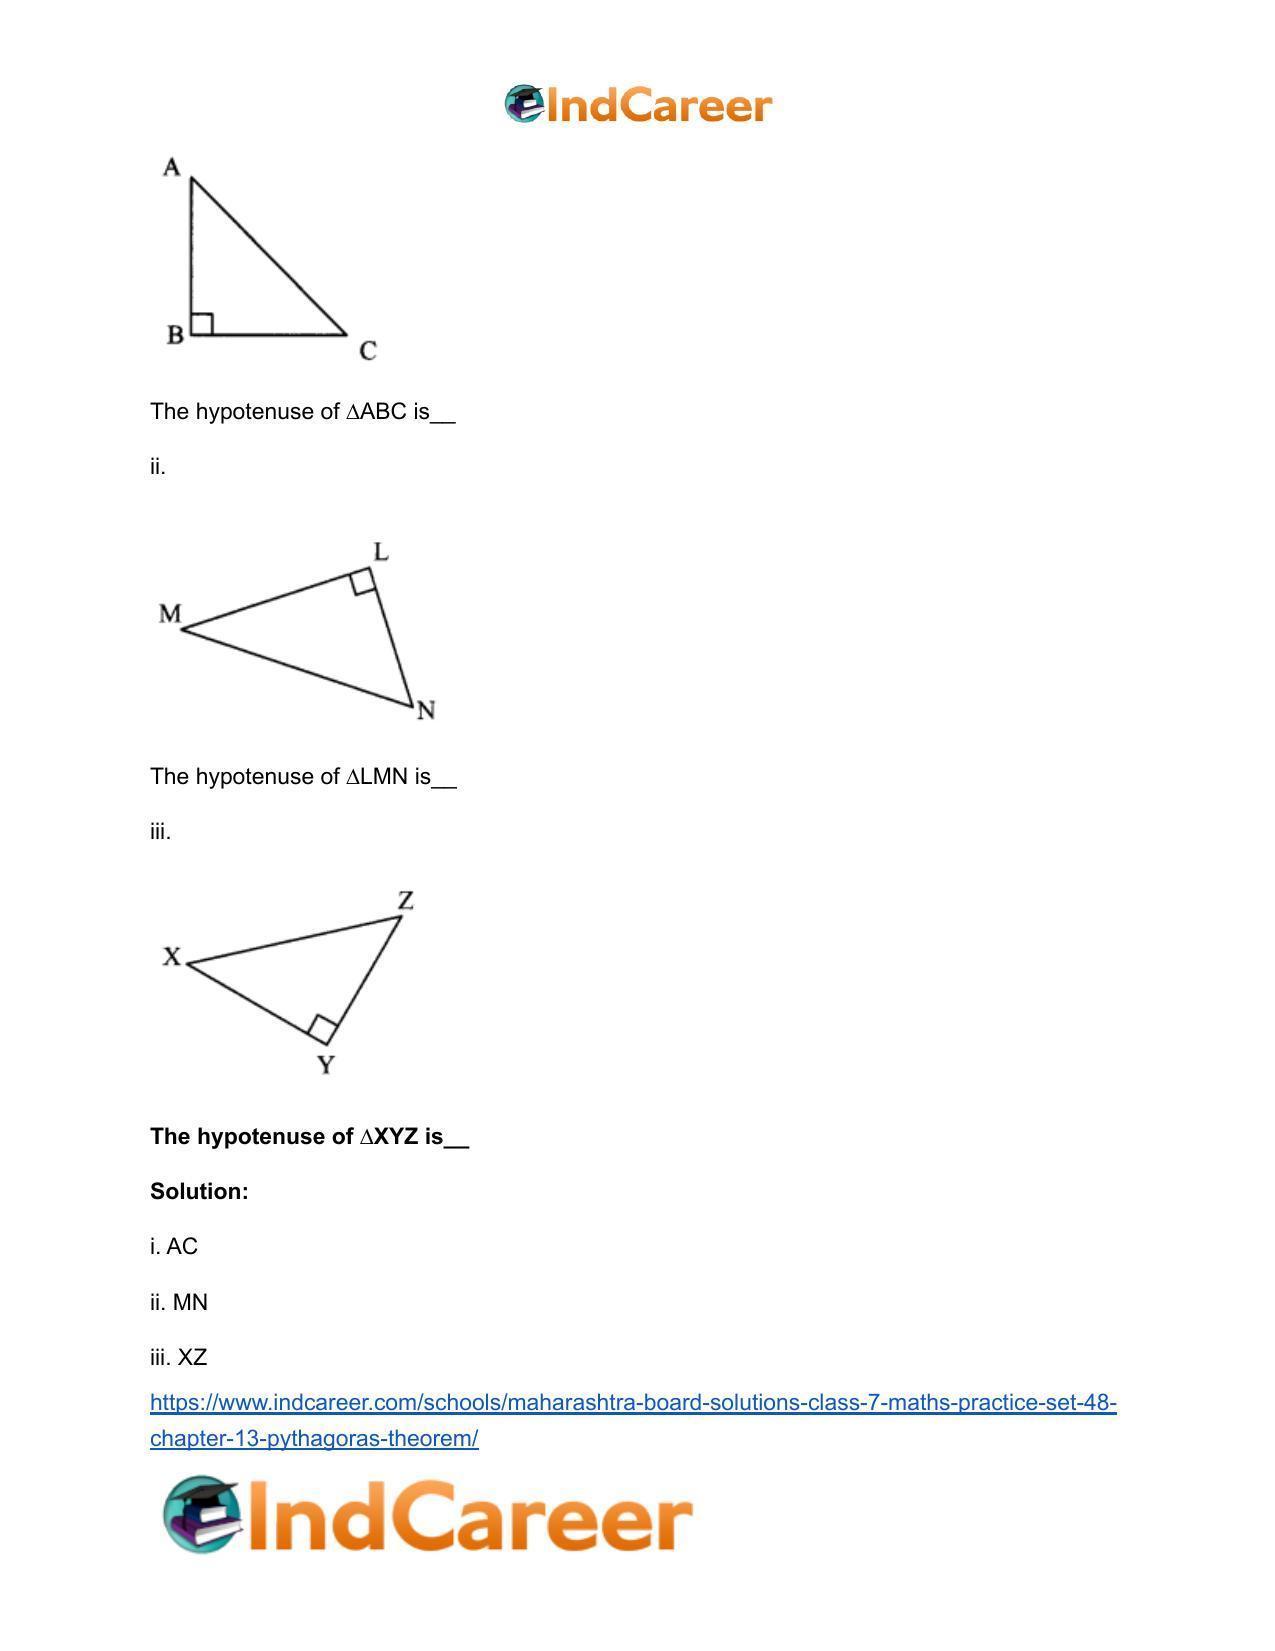 Maharashtra Board Solutions Class 7-Maths (Practice Set 48): Chapter 13- Pythagoras Theorem - Page 7